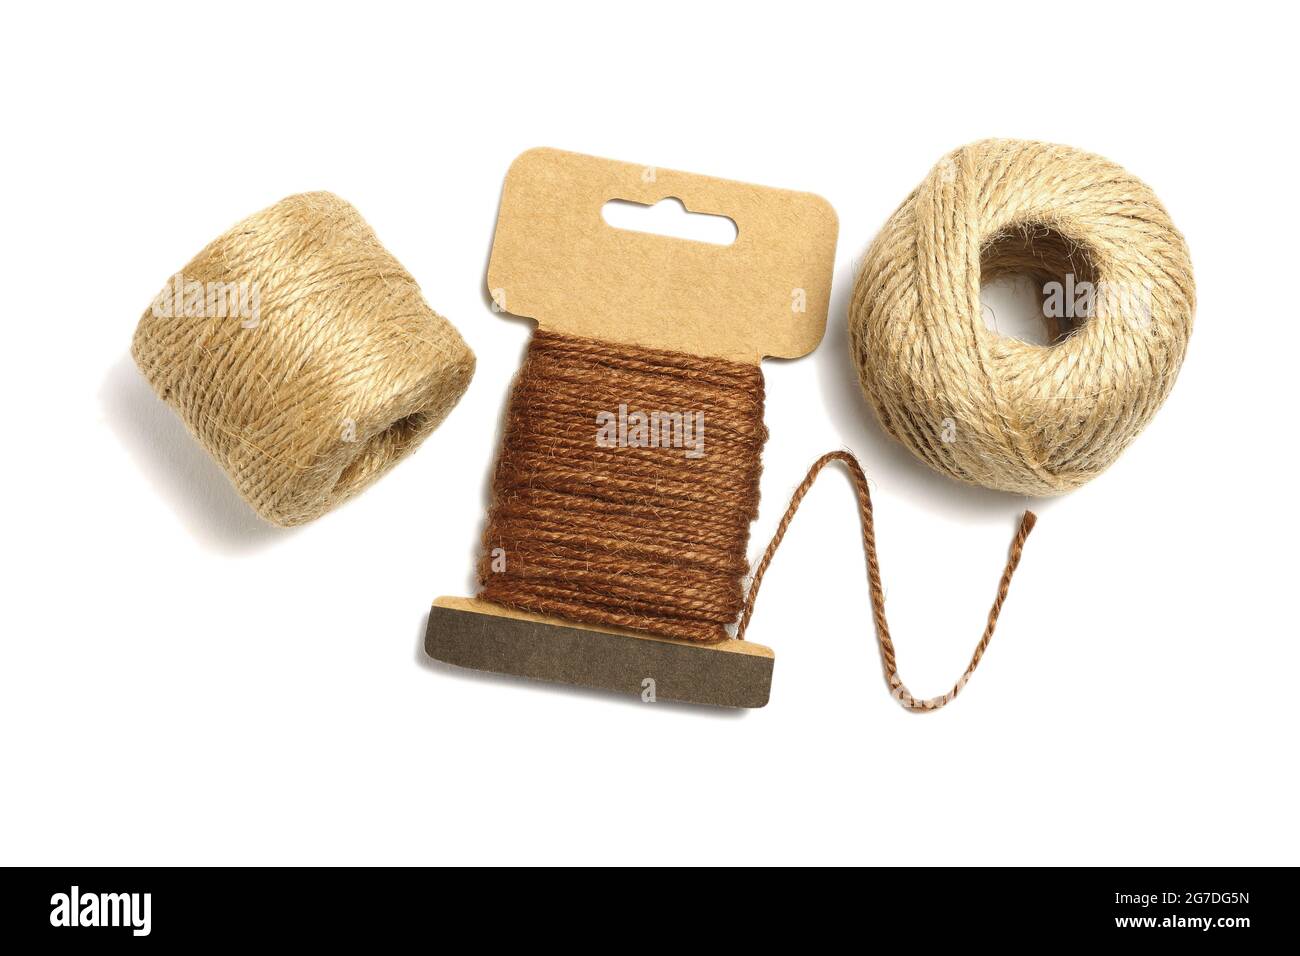 Rolls of Jute twine Rope on White Background Stock Photo